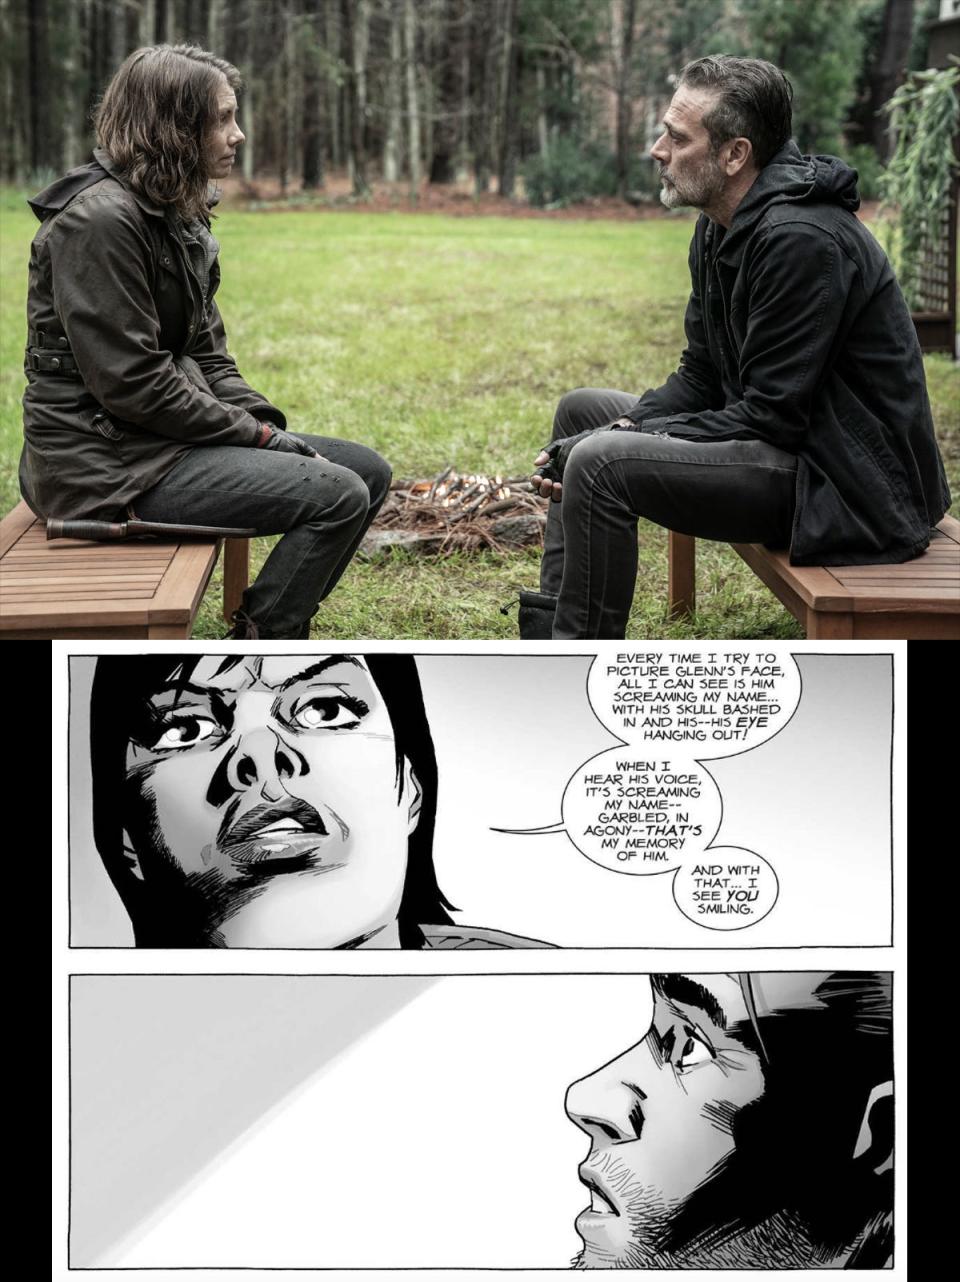 TWD 1124 Maggie and Negan